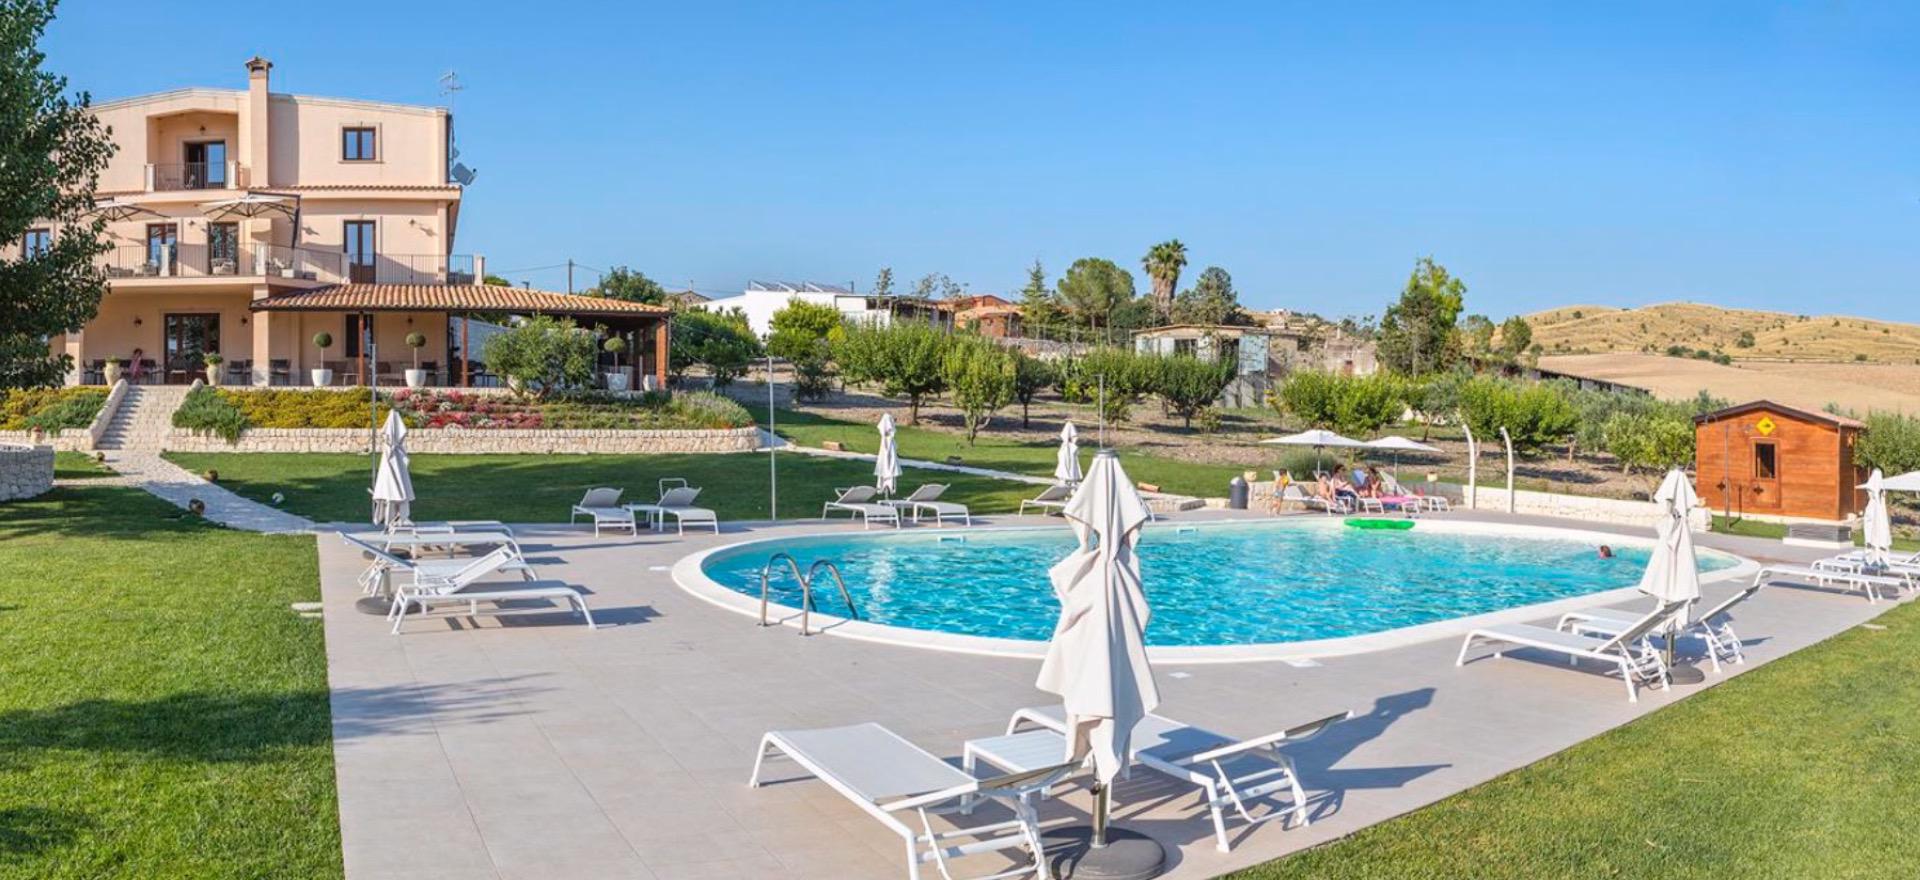 Agriturismo Sicily Child friendly agriturismo Sicily with beautiful pool